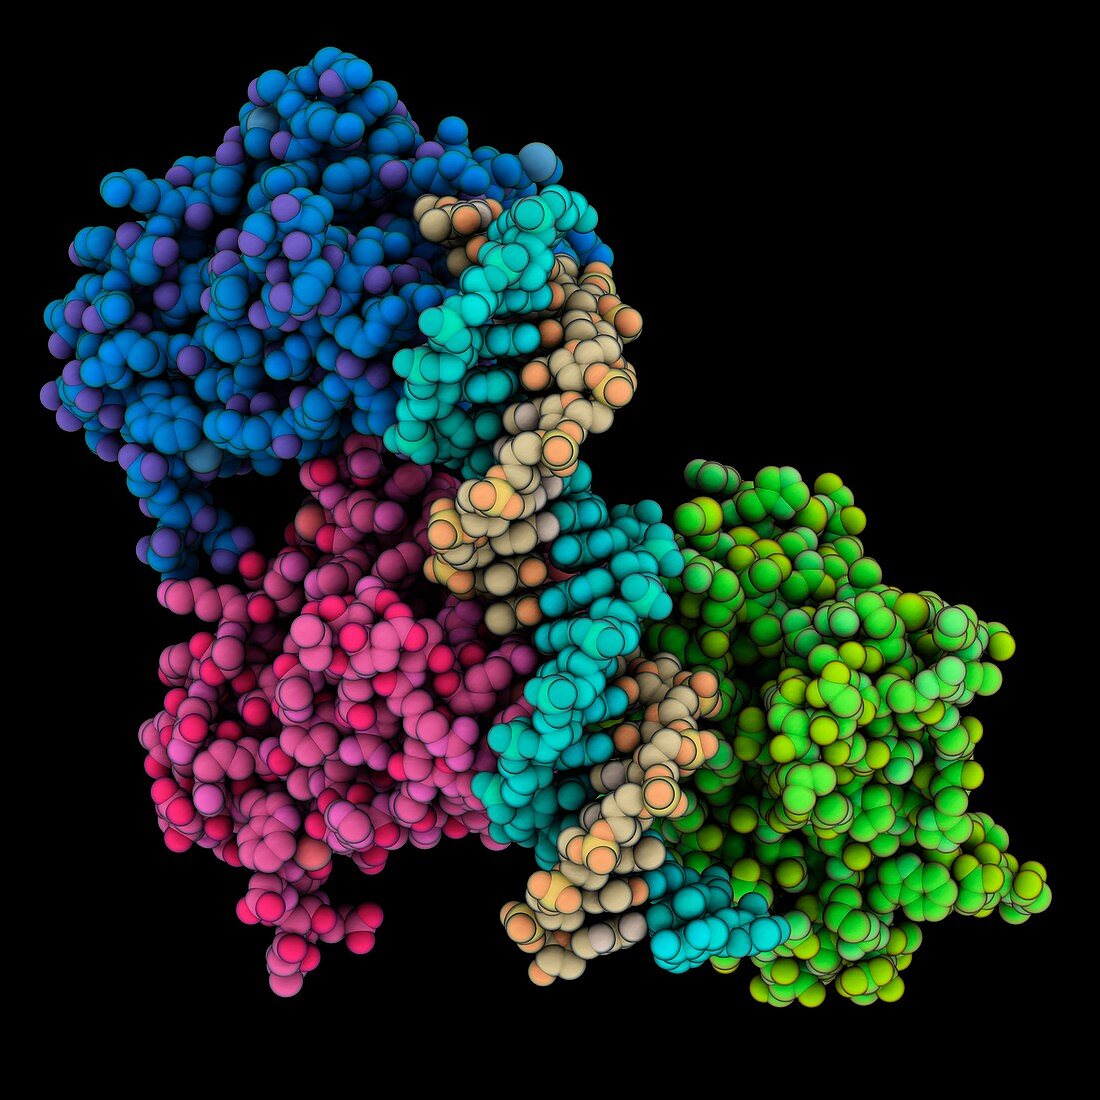 p53 core domain complexed with DNA